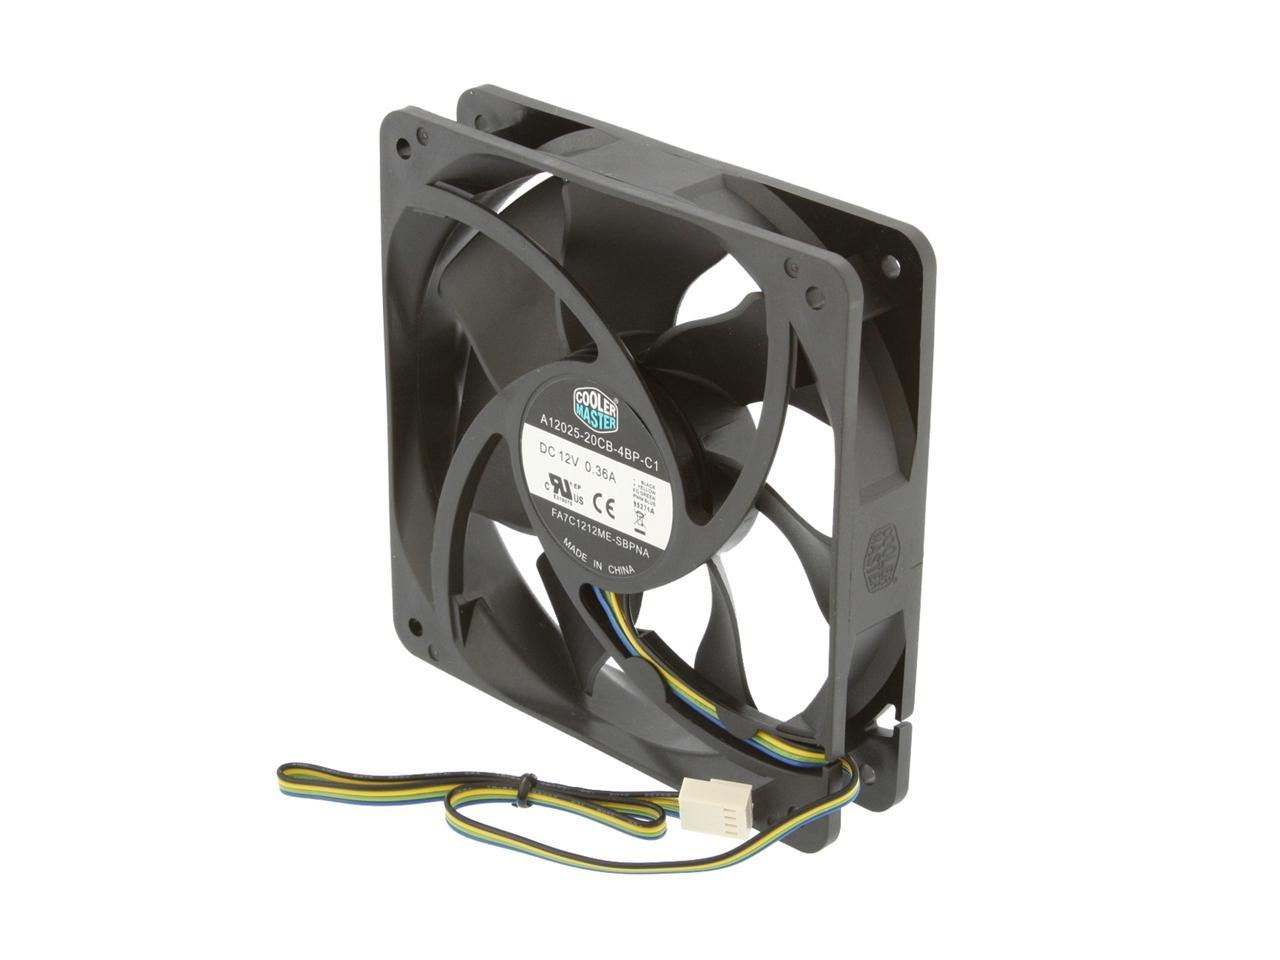 Cooler Master Blade Master 120 - Sleeve Bearing 120mm PWM Cooling Fan for Computer Cases, CPU Coolers, and Radiators